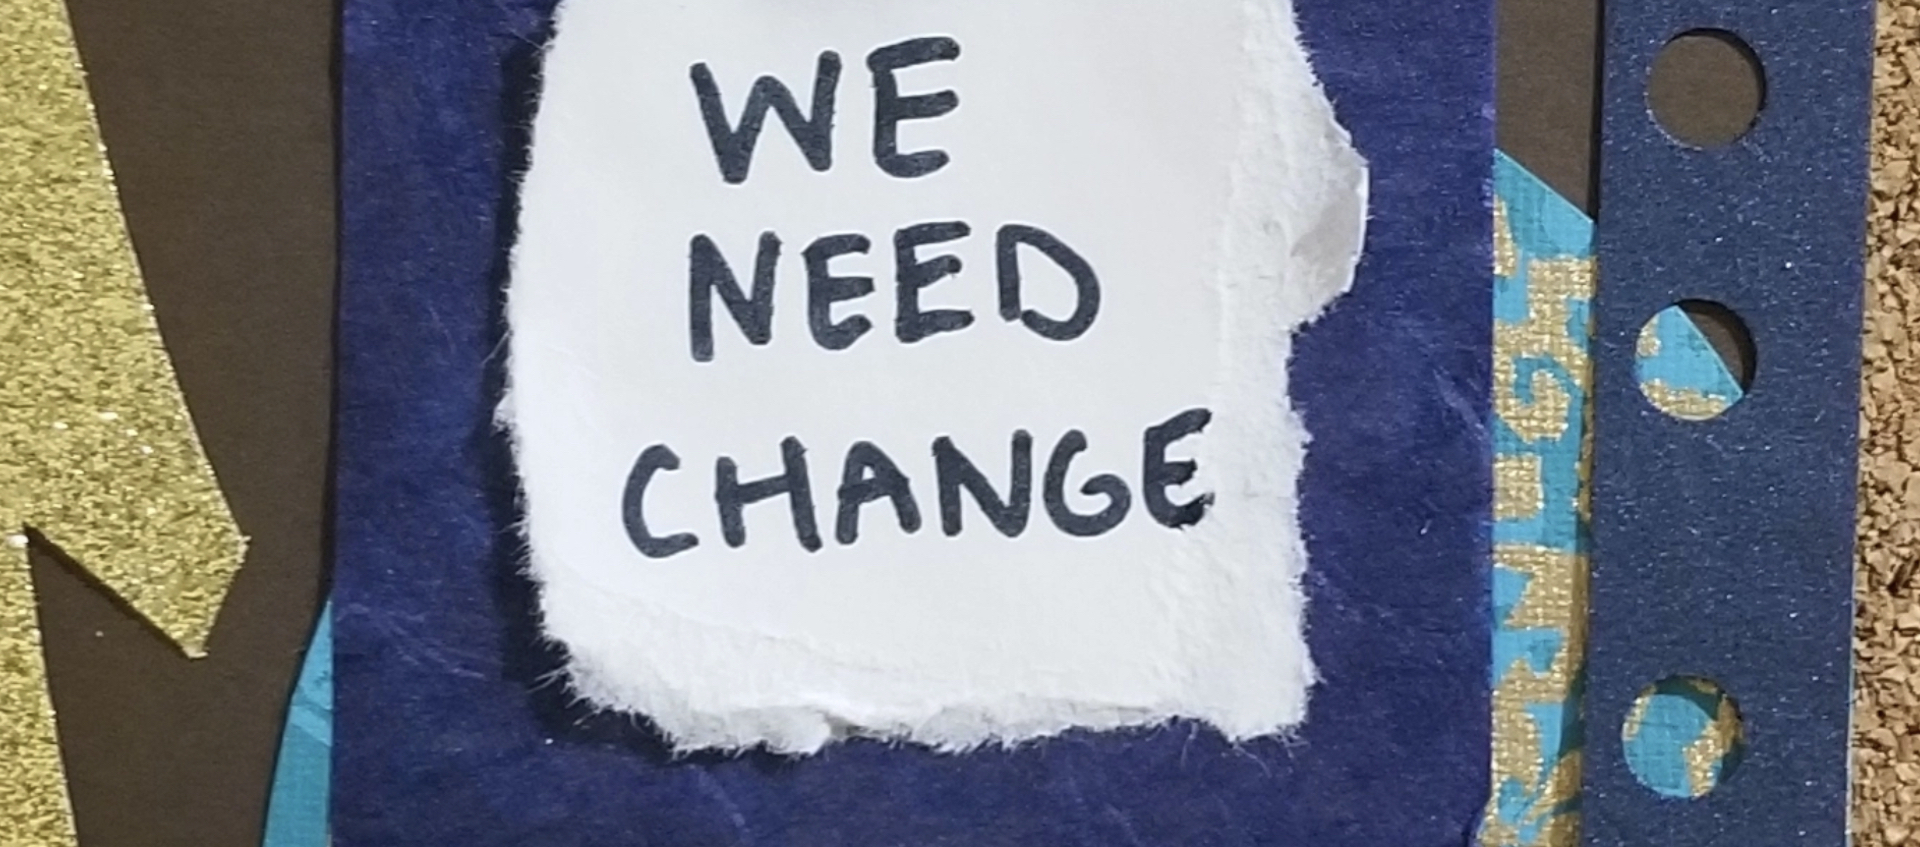 Mixed paper collage with "We need change" handwritten on a piece of paper at the center